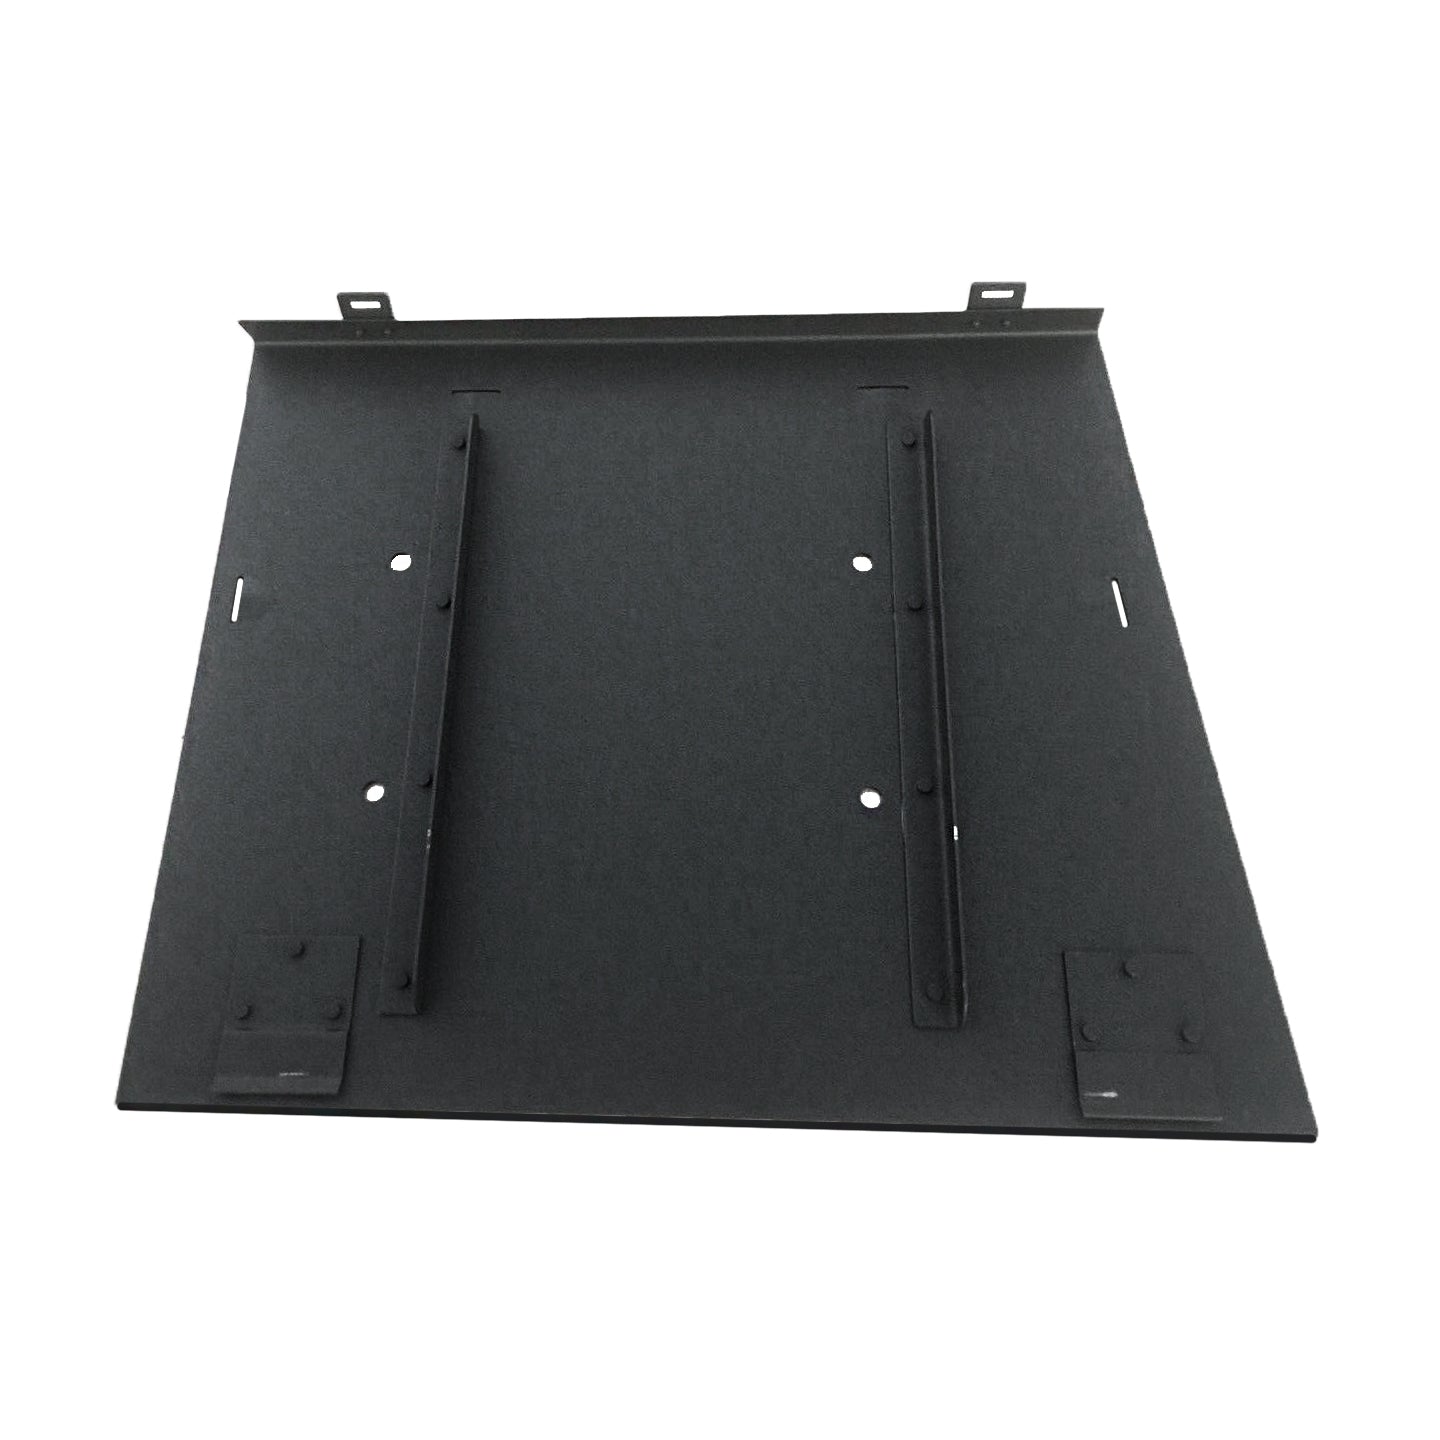 Left Rear Seat Support Tray CP1R2T3B Top Plate Cover for Military Humvee